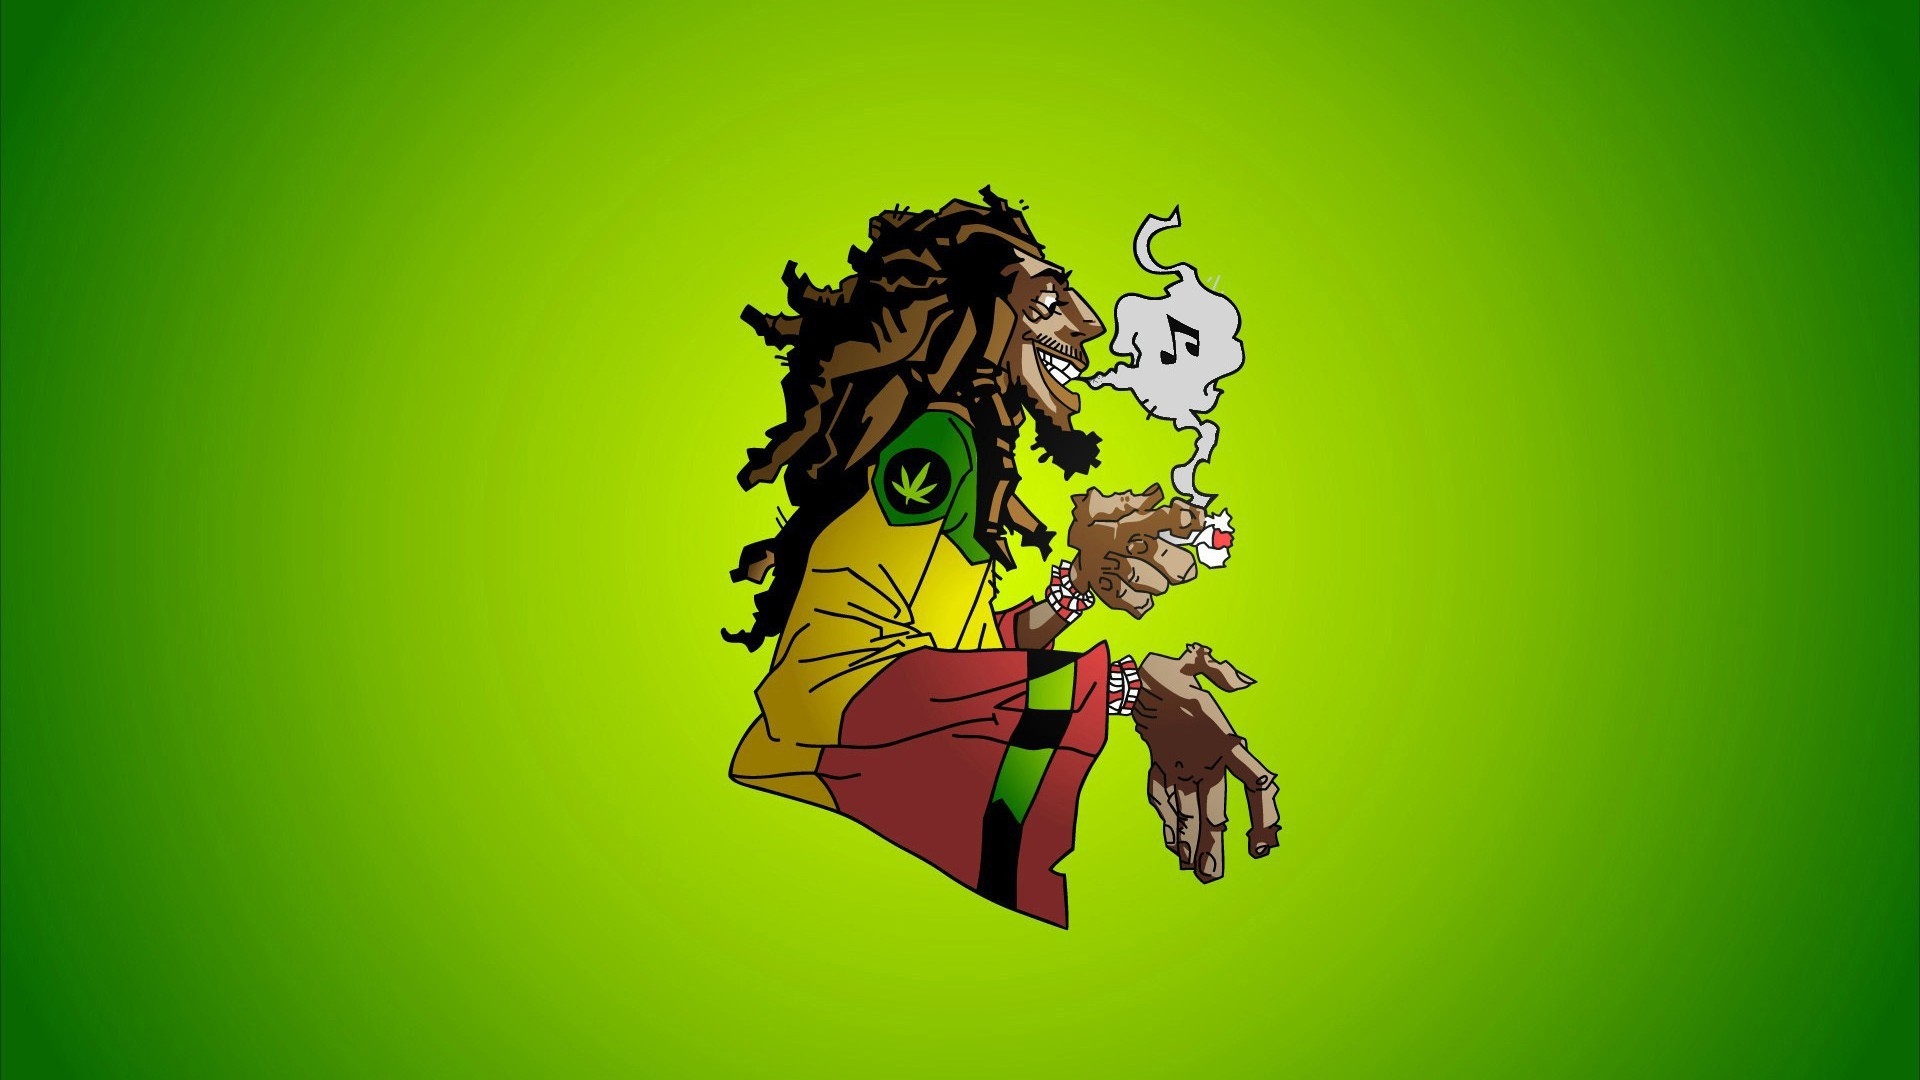 Bob Marley Caricature for 1920 x 1080 HDTV 1080p resolution